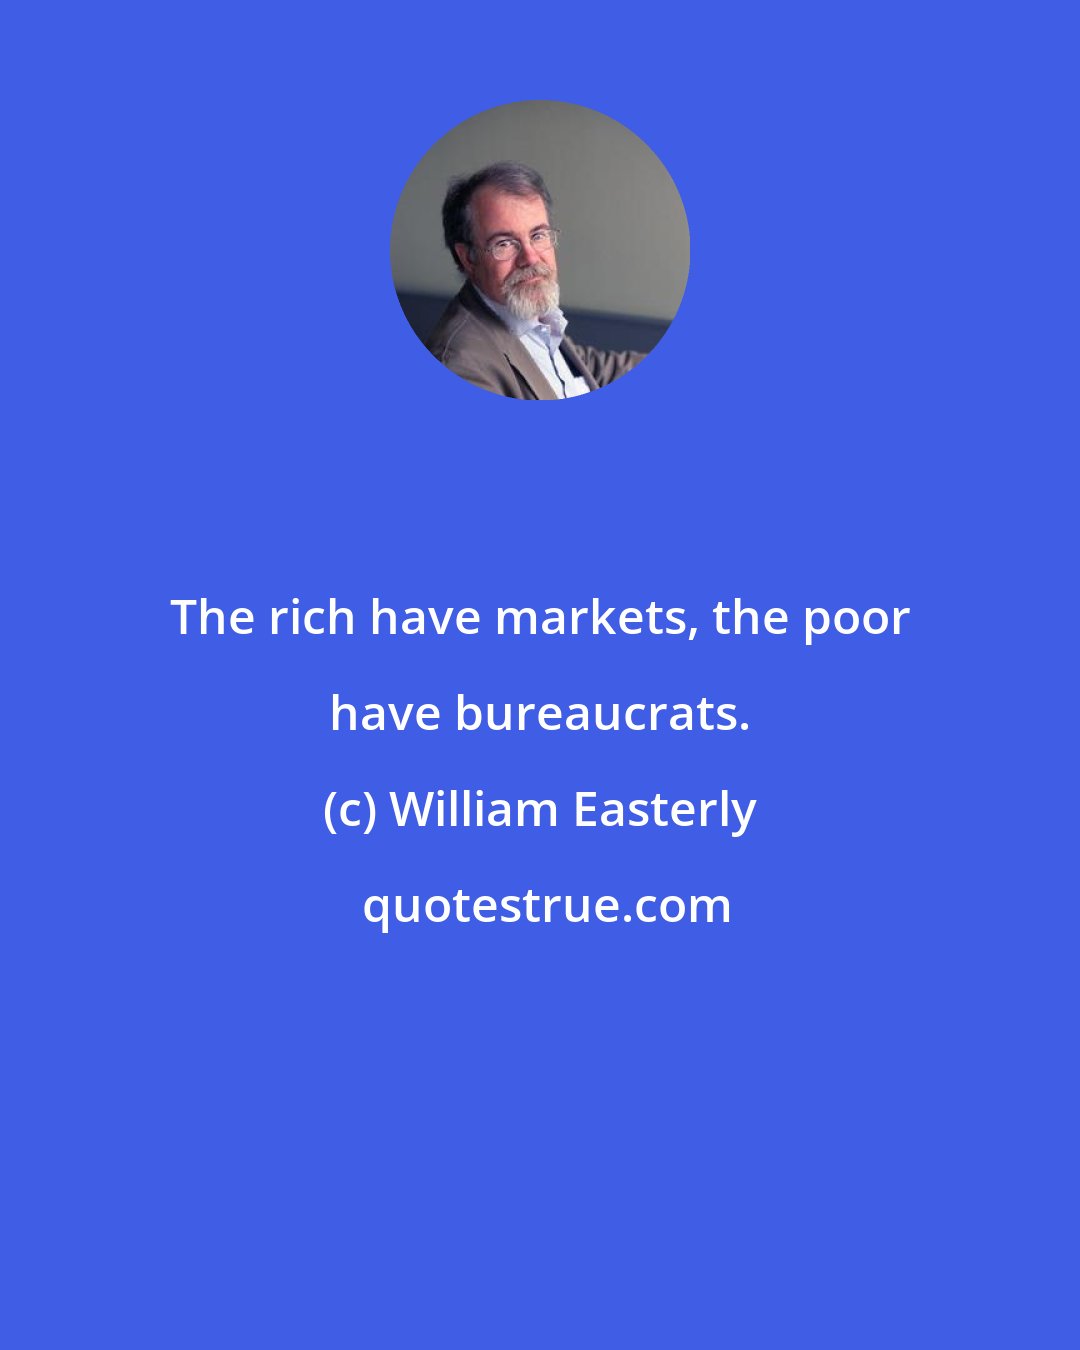 William Easterly: The rich have markets, the poor have bureaucrats.